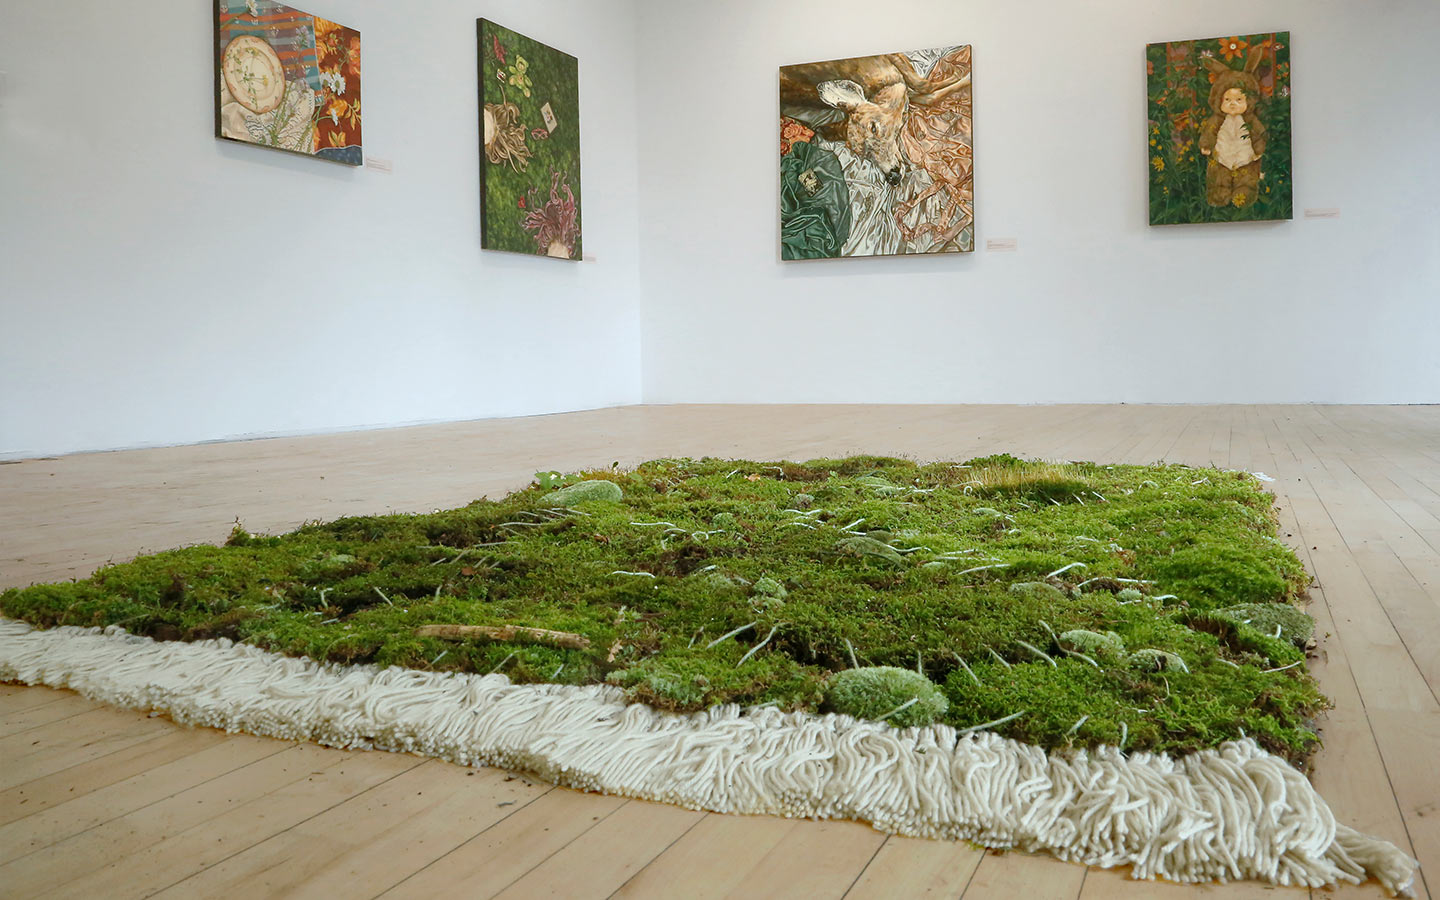 A shaggy rug made out of organize green plants in a gallery with paintings on the walls.